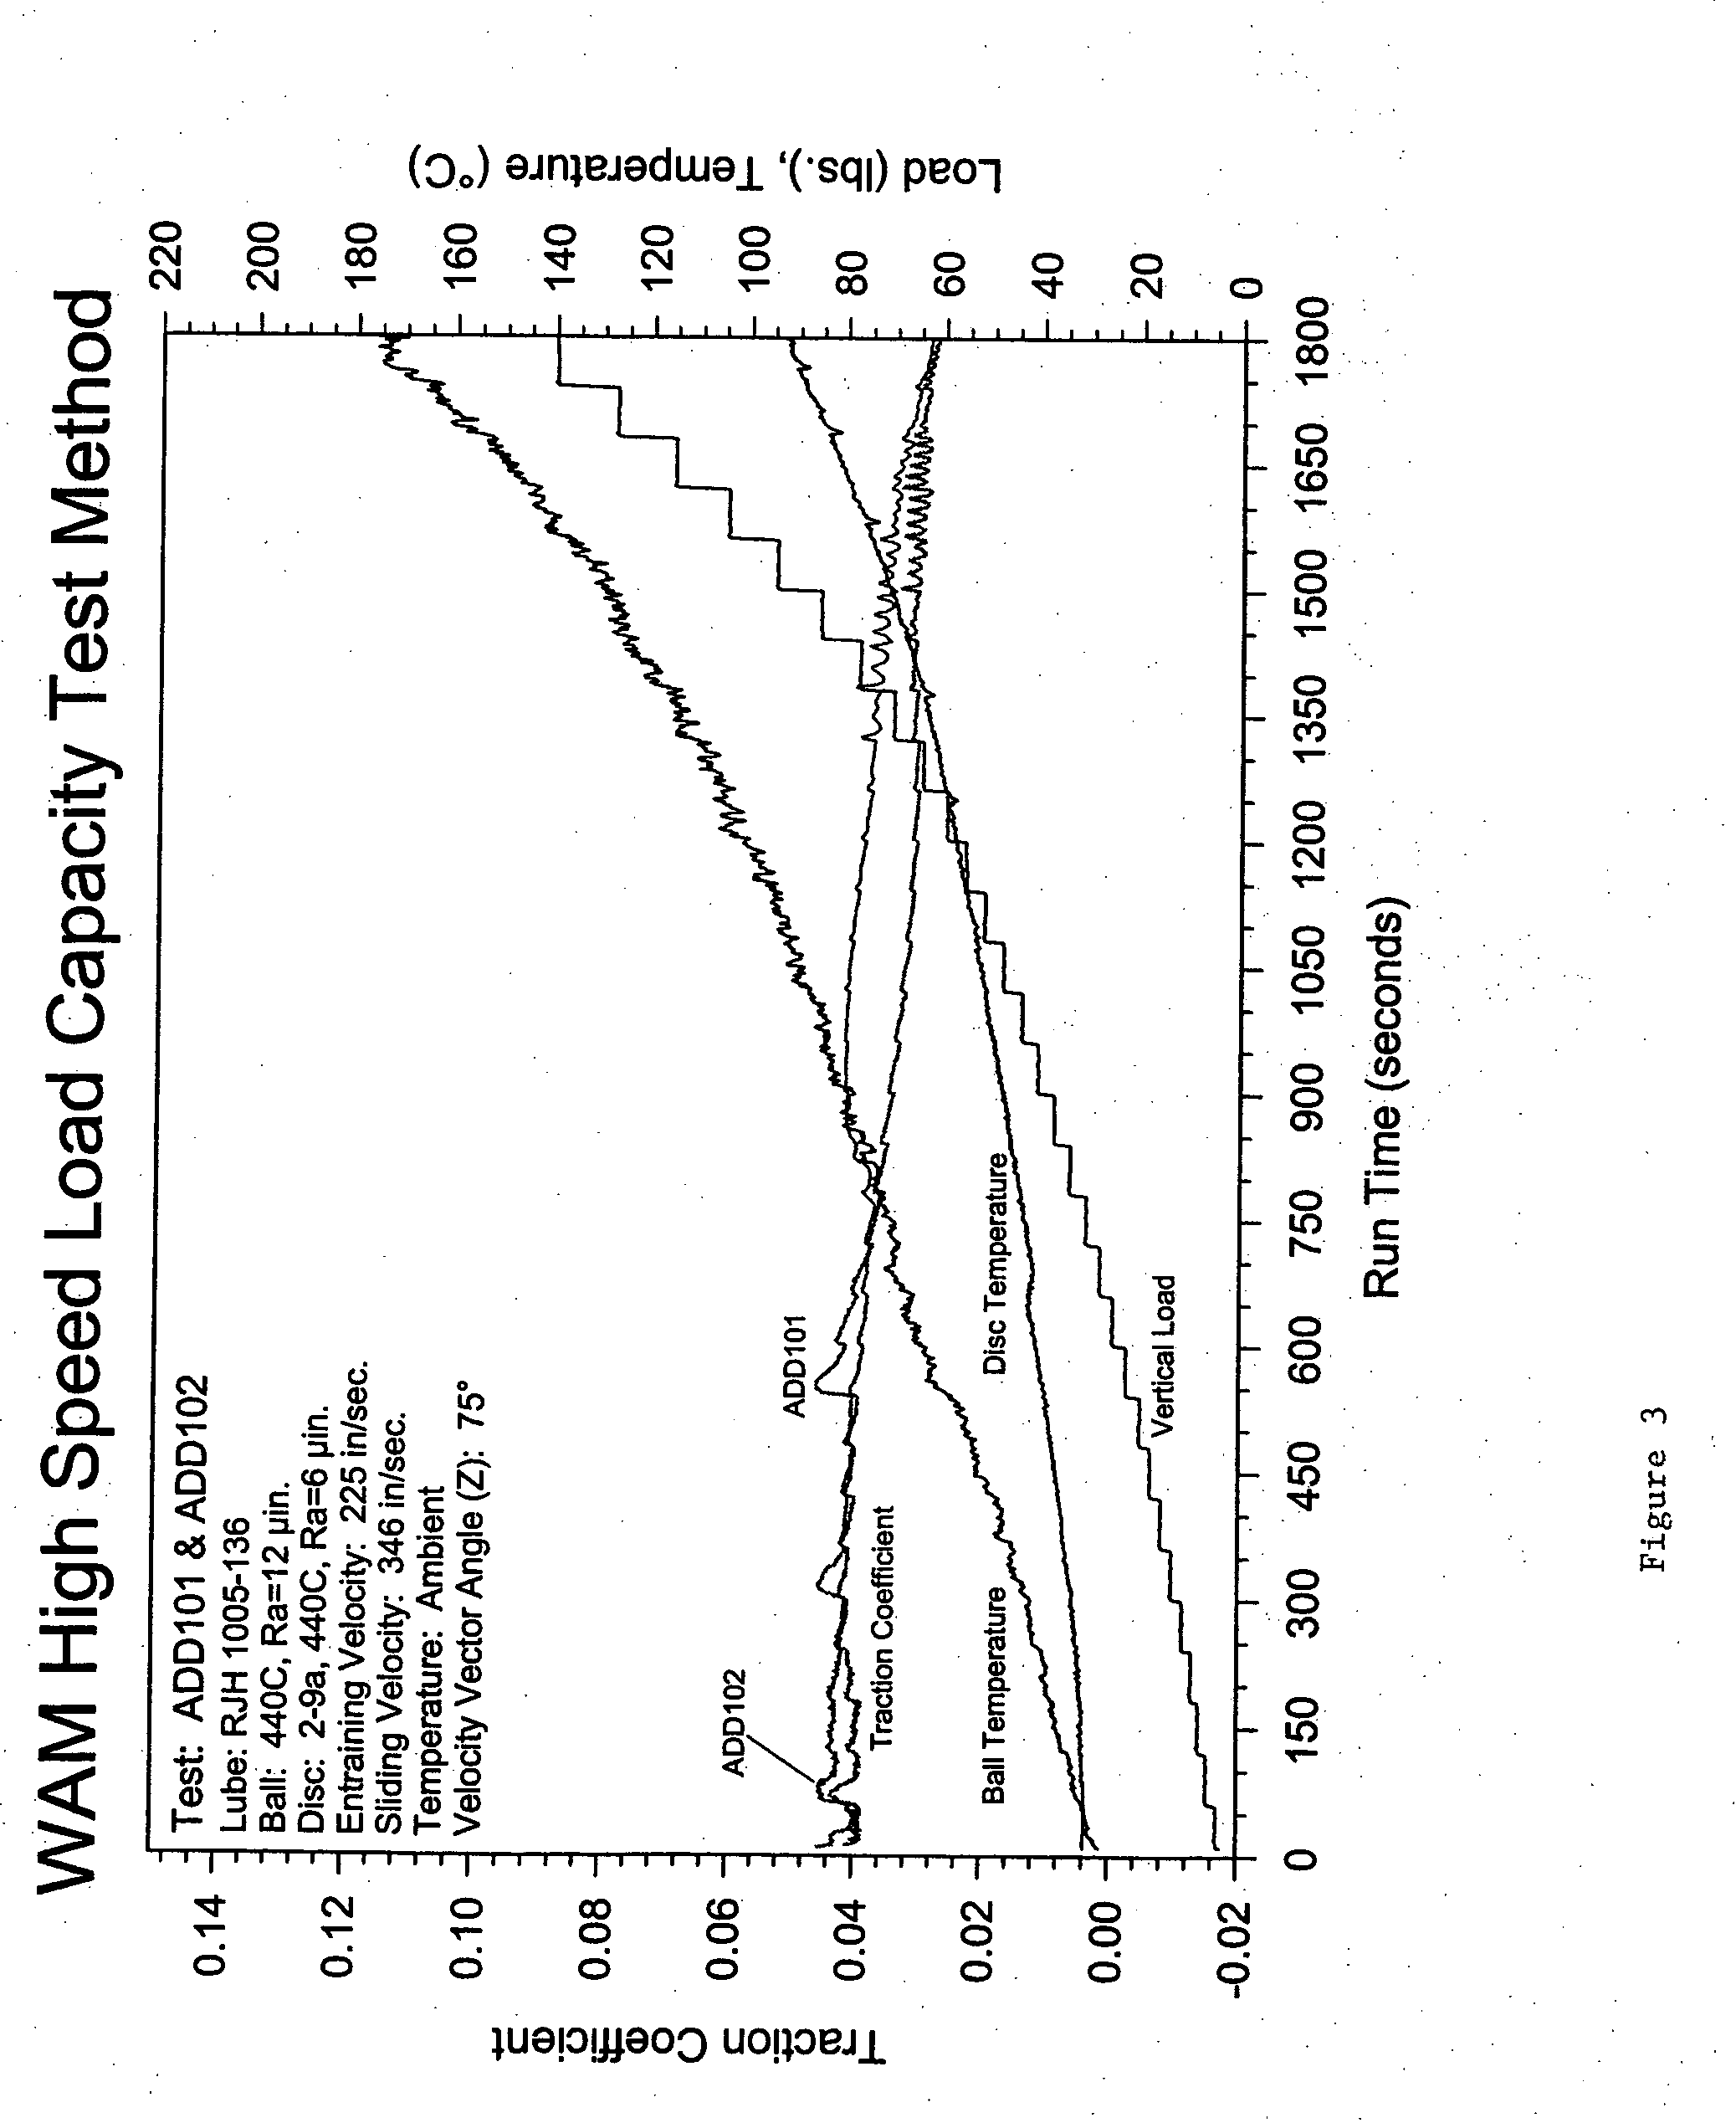 Lubricating compositions containing synthetic ester base oil, molybdenum compounds and thiadiazole-based compounds